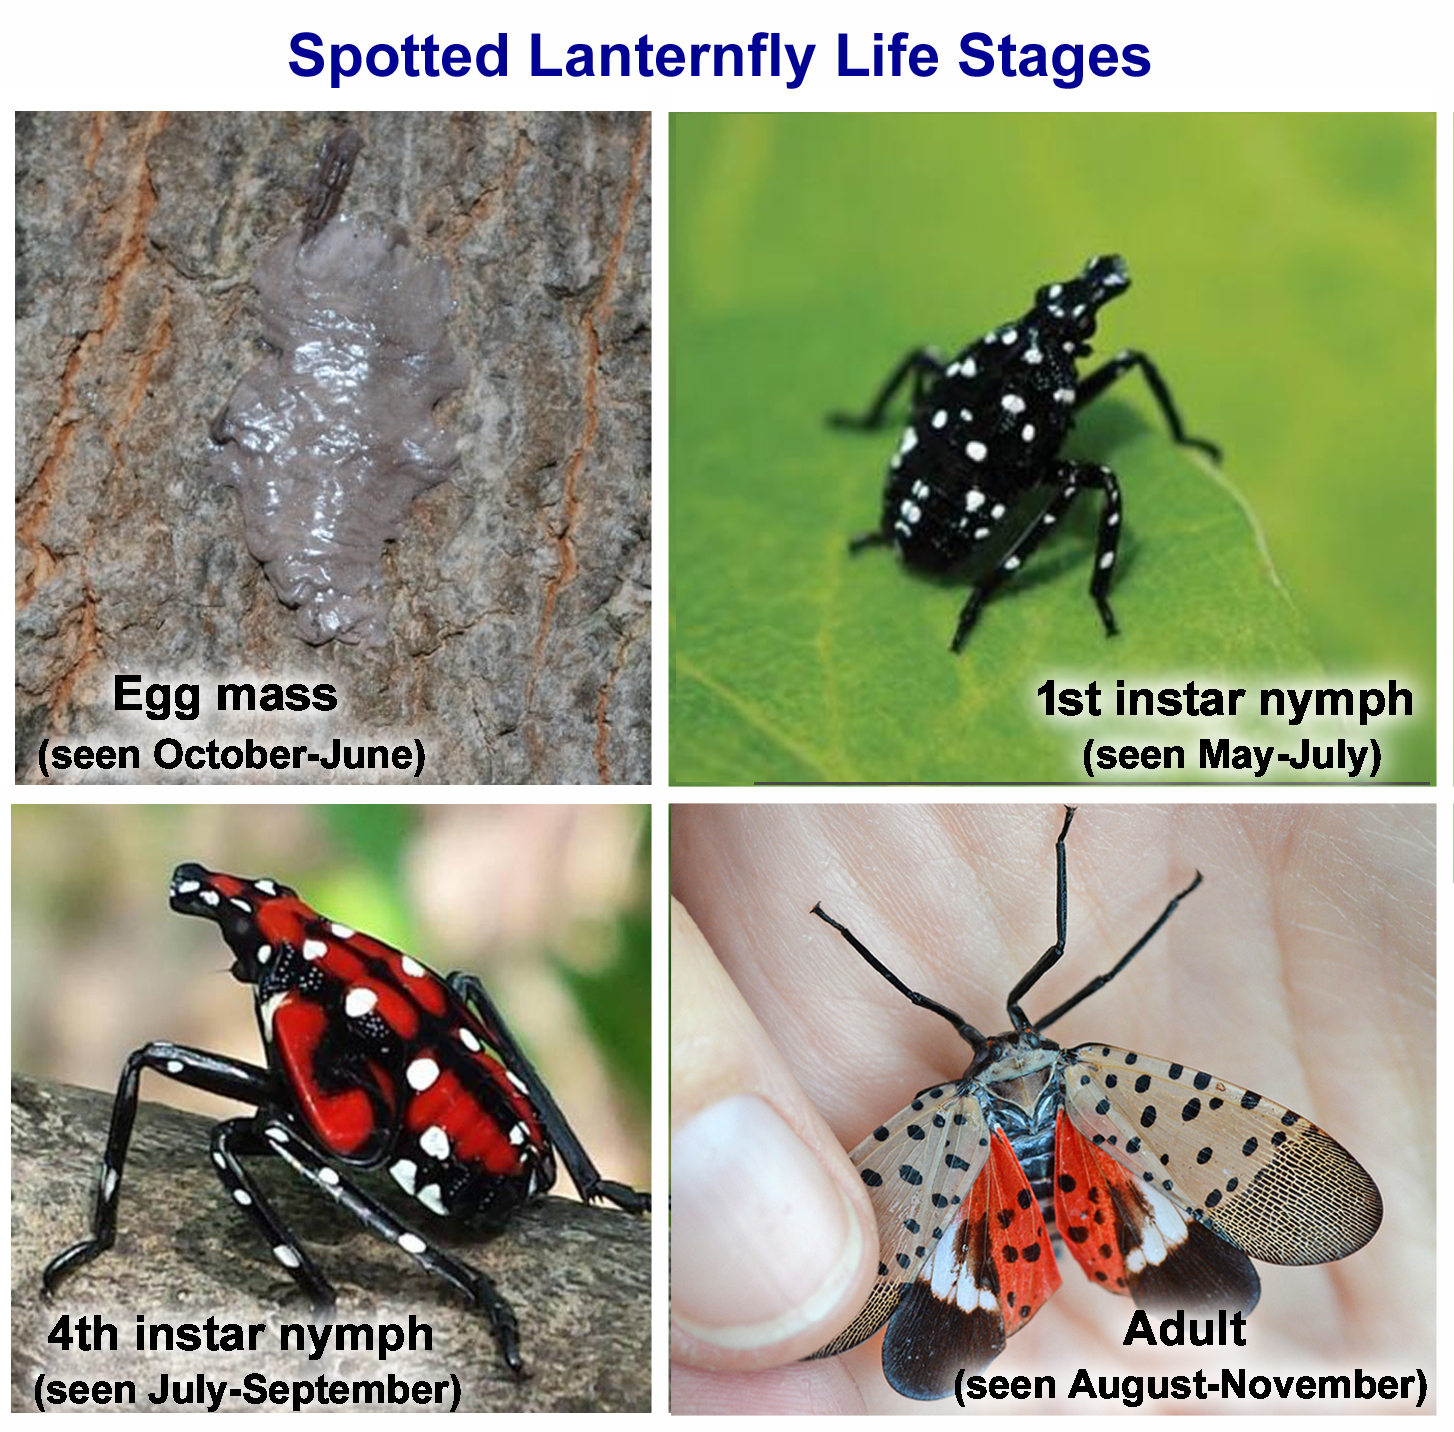 images of spotted lanternfly life stages; egg mass, 1st instar nymph, 4th instar nympth, adult